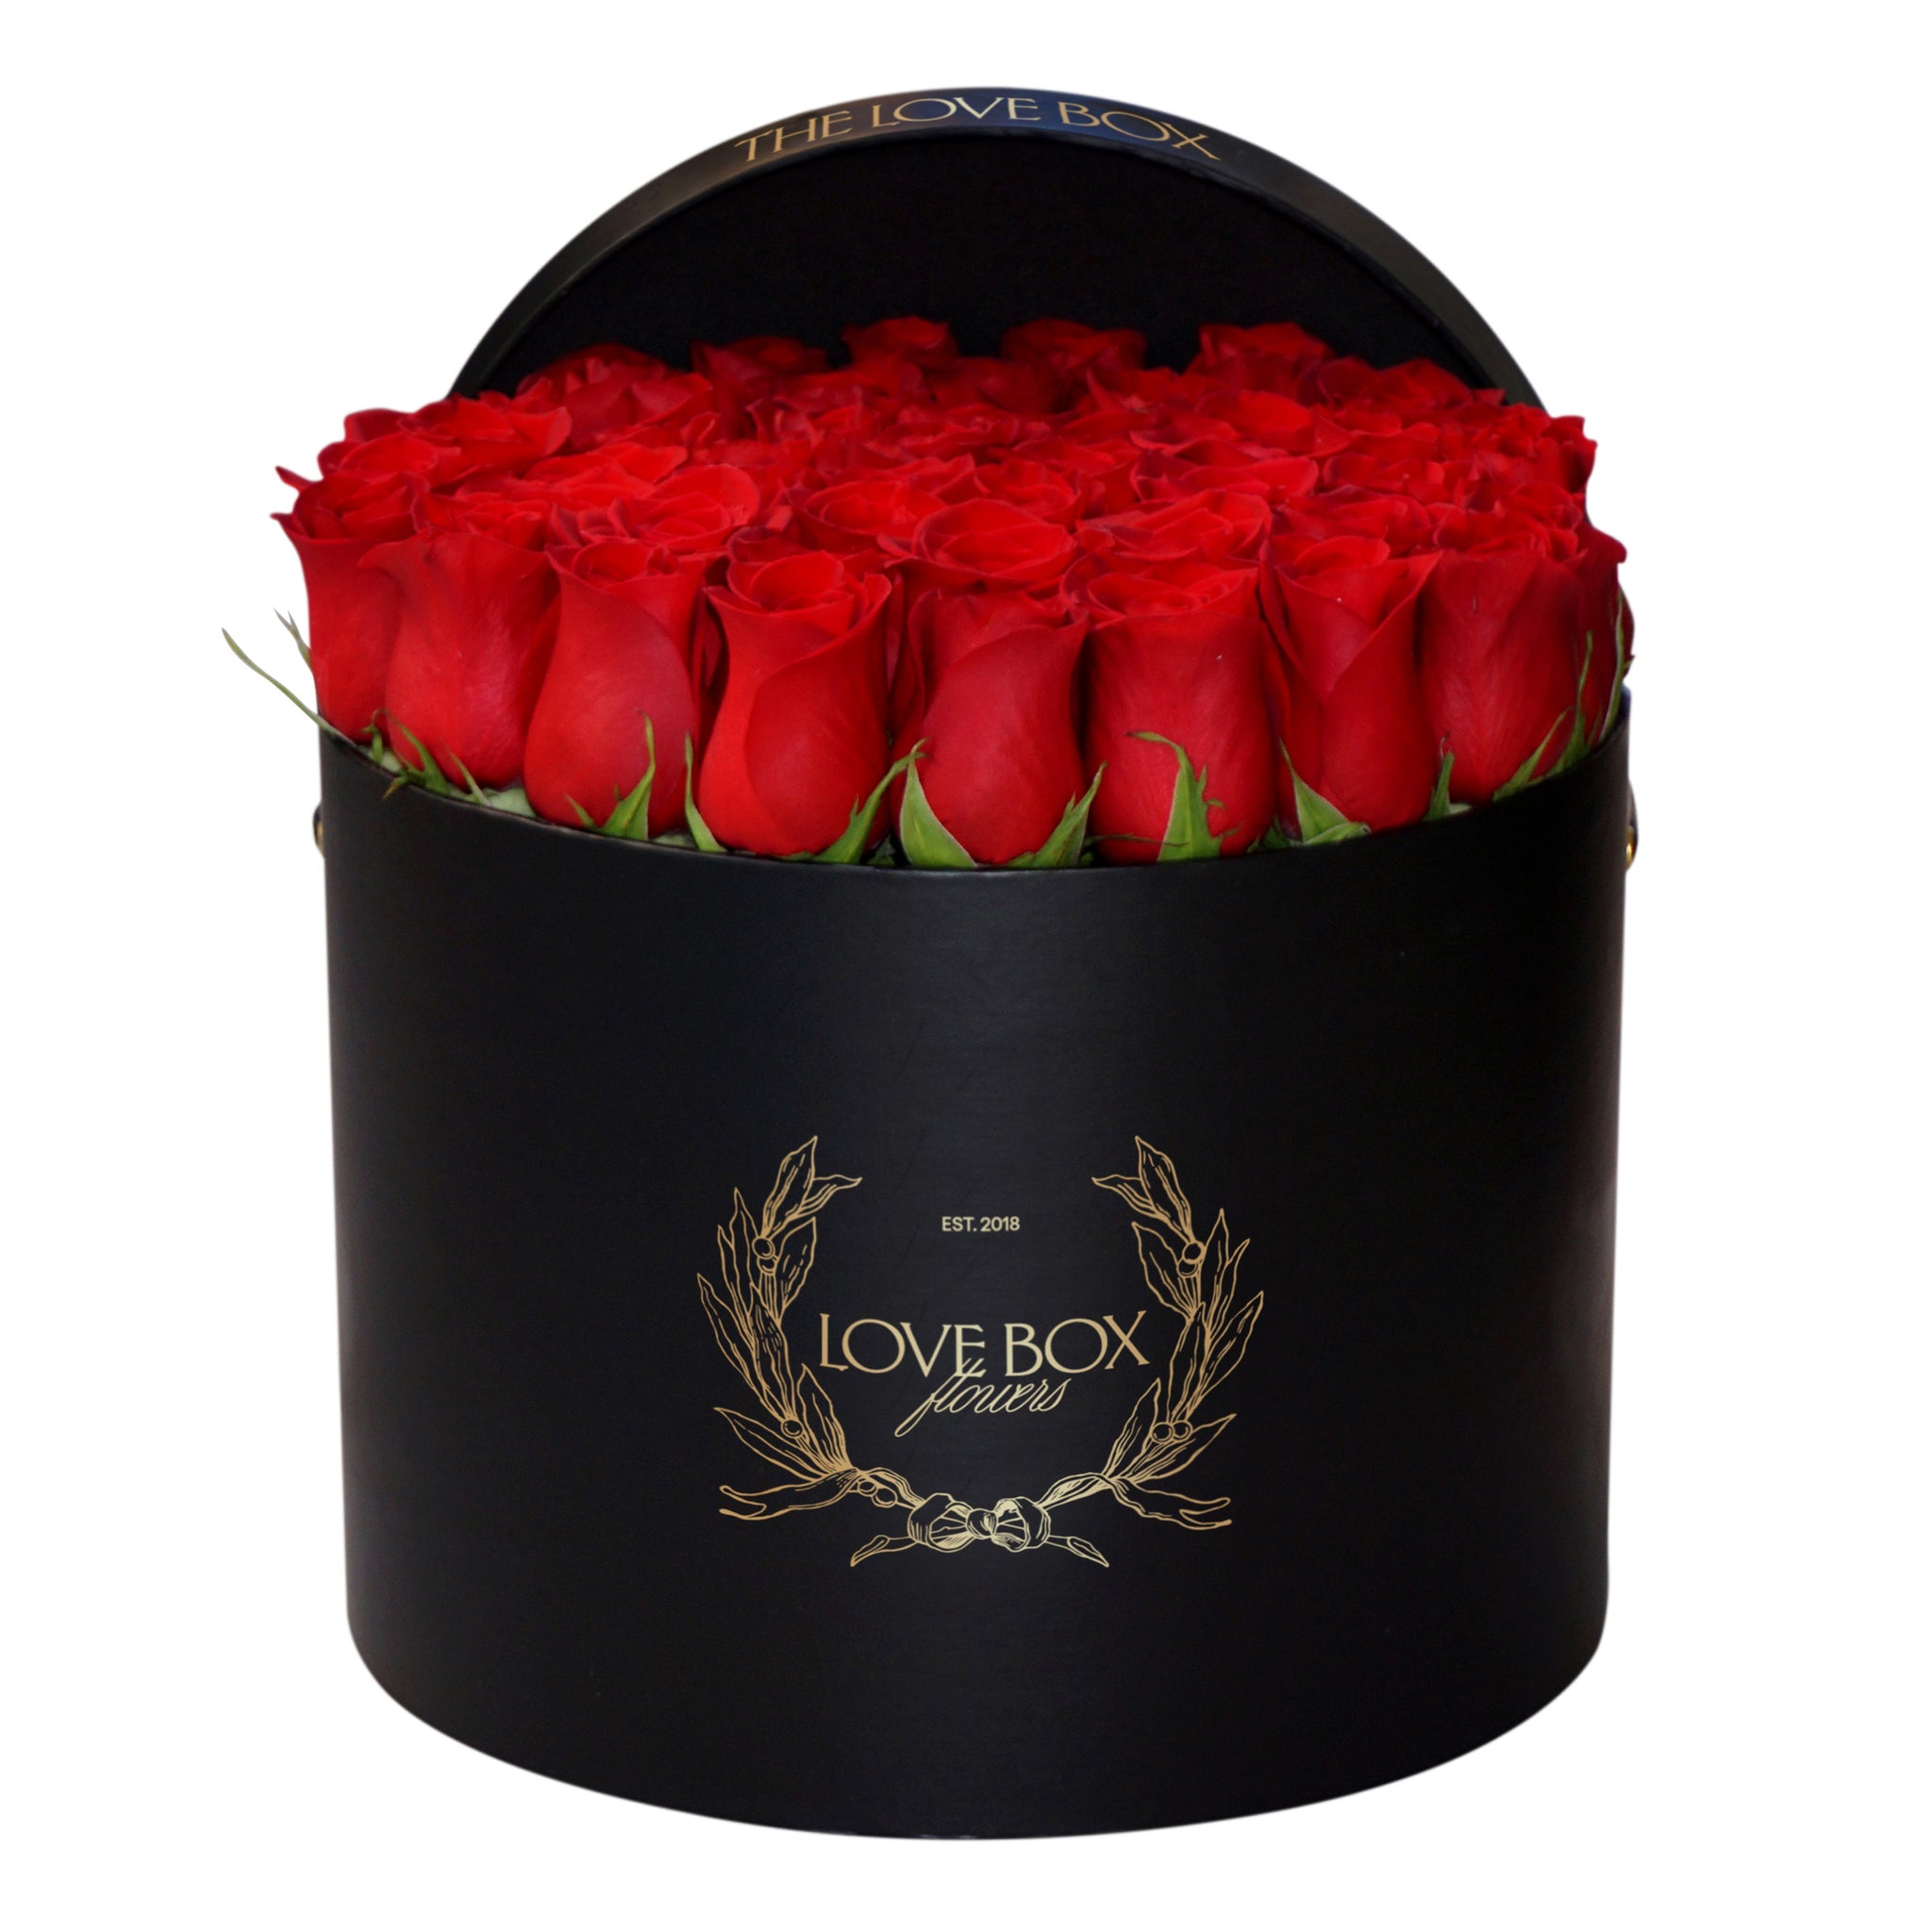 Classic Red Roses in Large Black Box